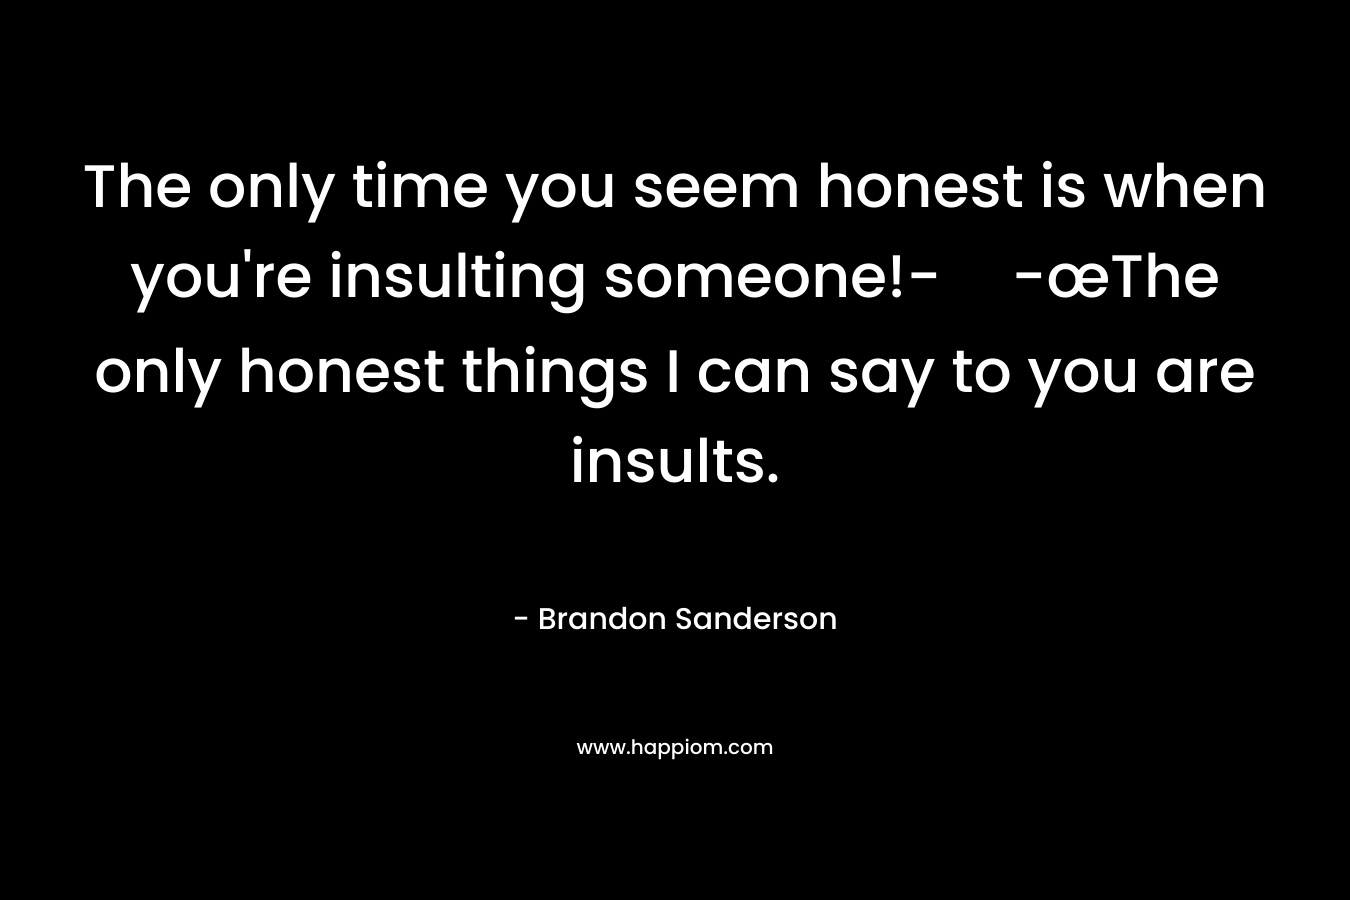 The only time you seem honest is when you're insulting someone!--œThe only honest things I can say to you are insults.